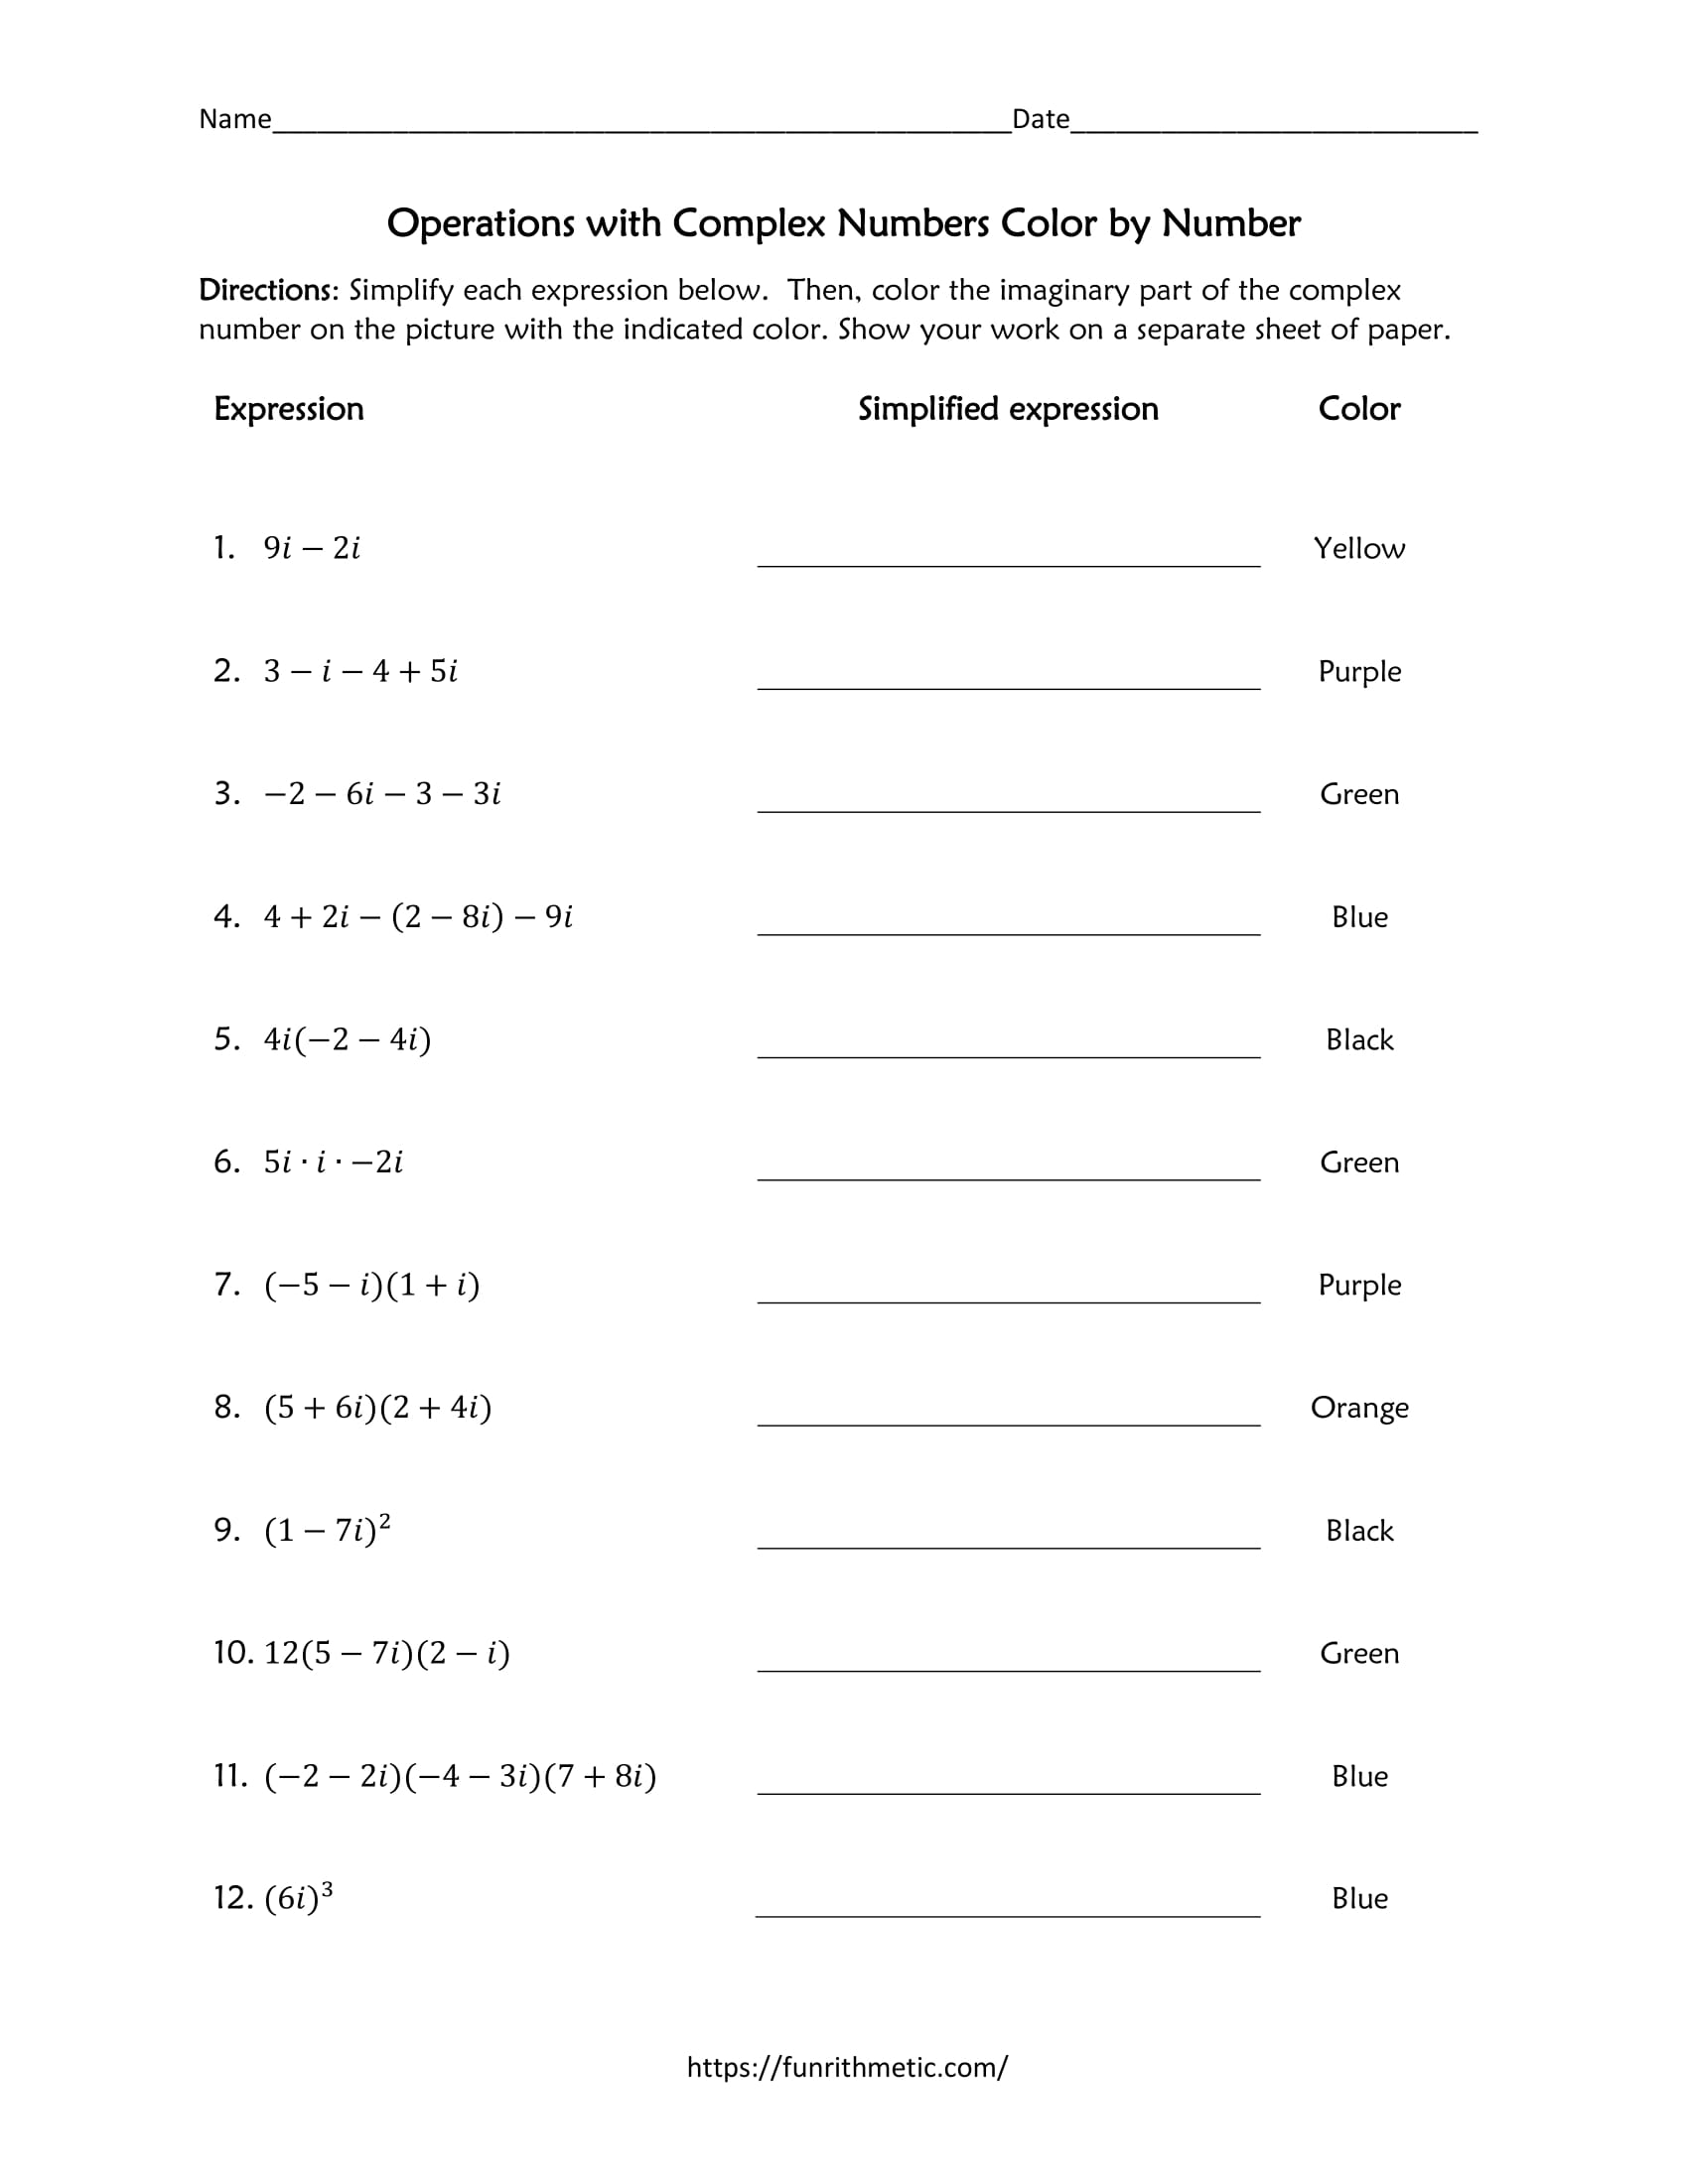 Simplifying Complex Numbers Coloring Worksheet Answers